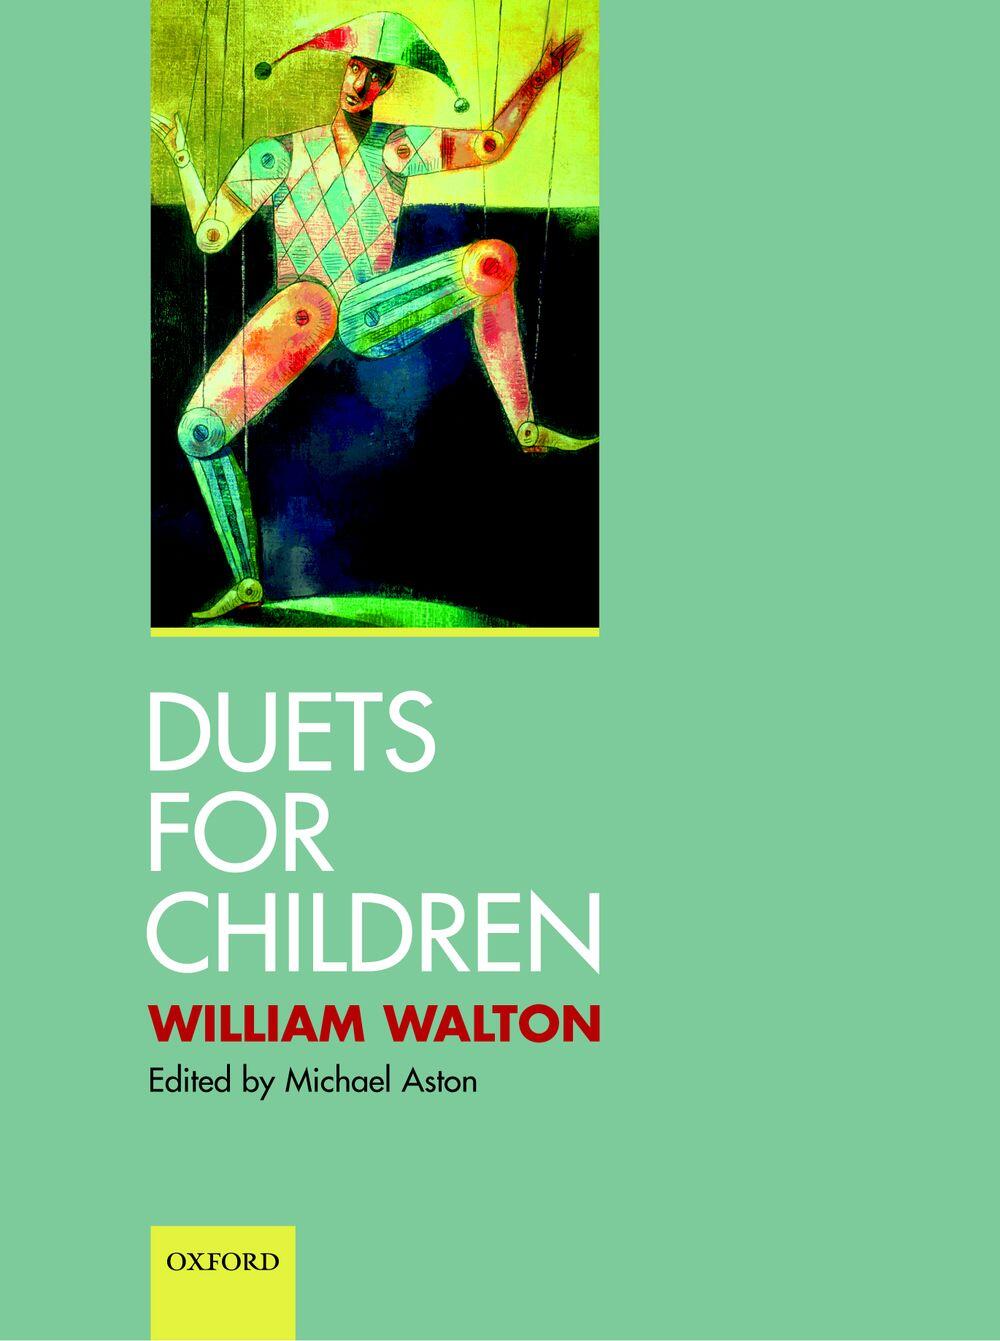 Oxford University Duets For Children 2 Pianos / Piano duets : photo 1